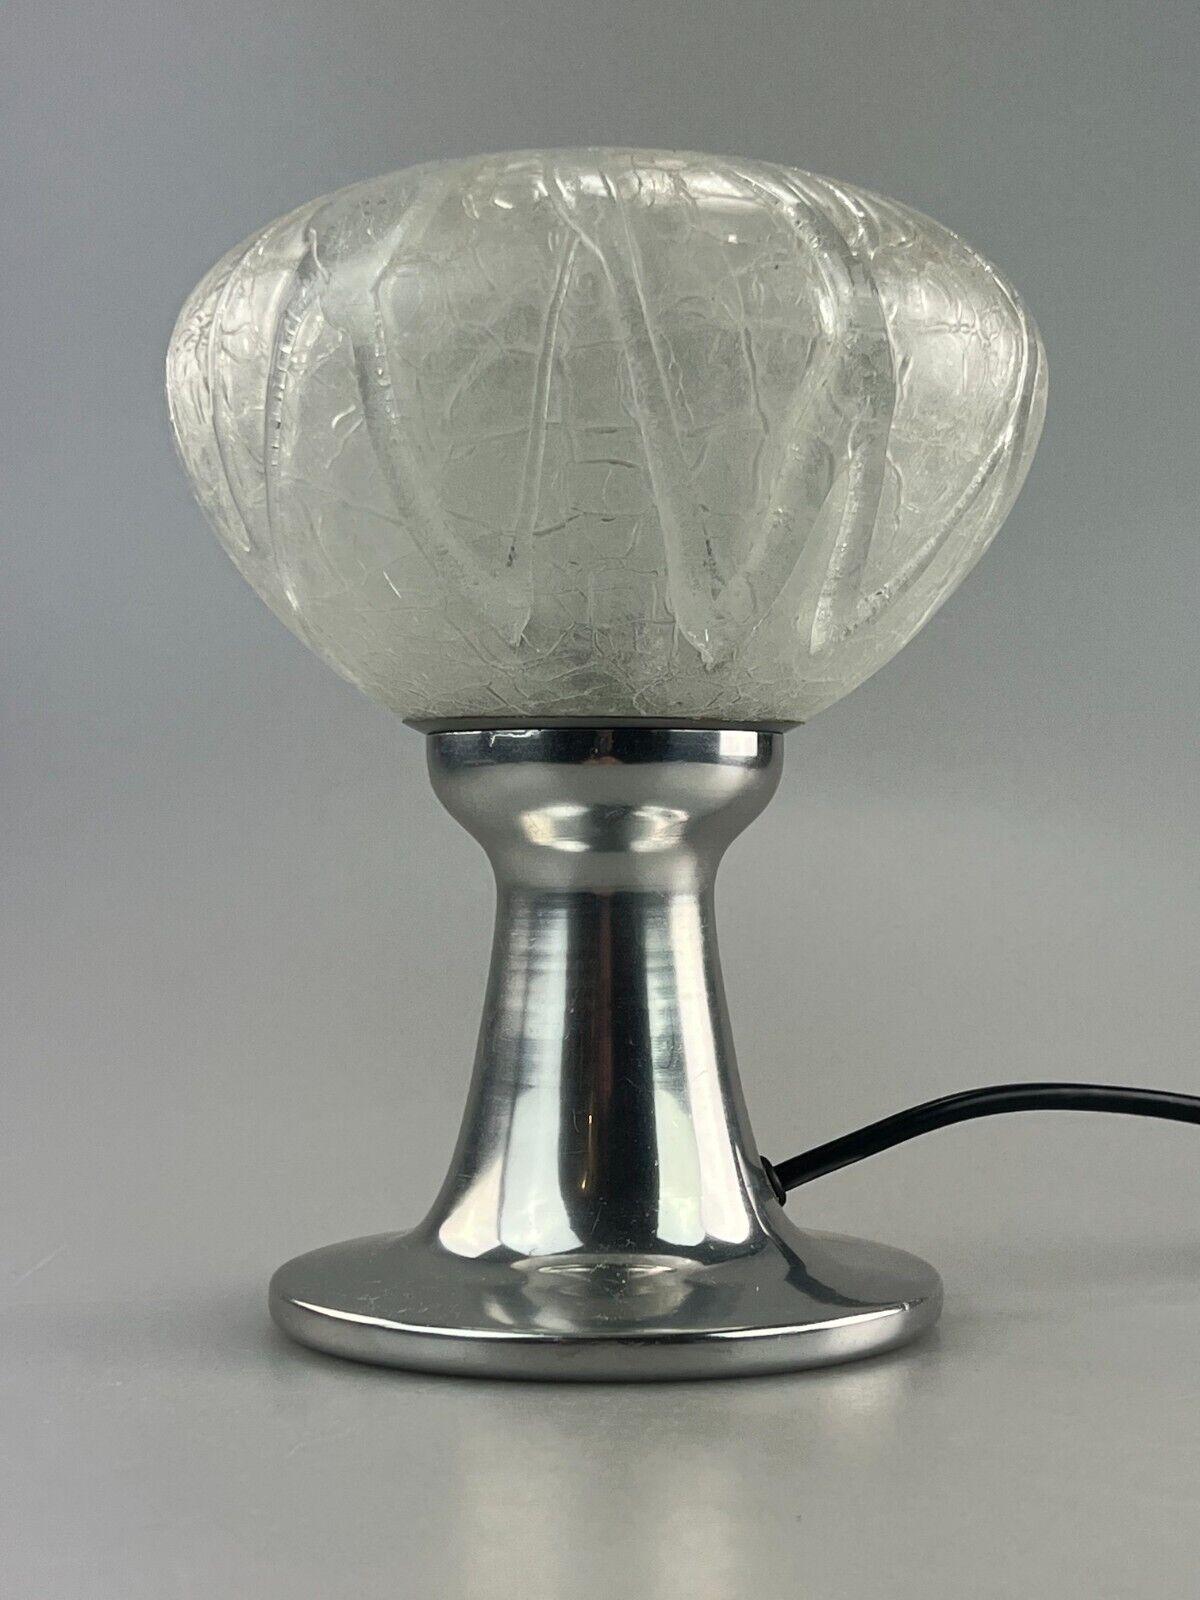 German 60s 70s Table Lamp Bedside Lamp Chrome Doria Glass Space Age Design For Sale